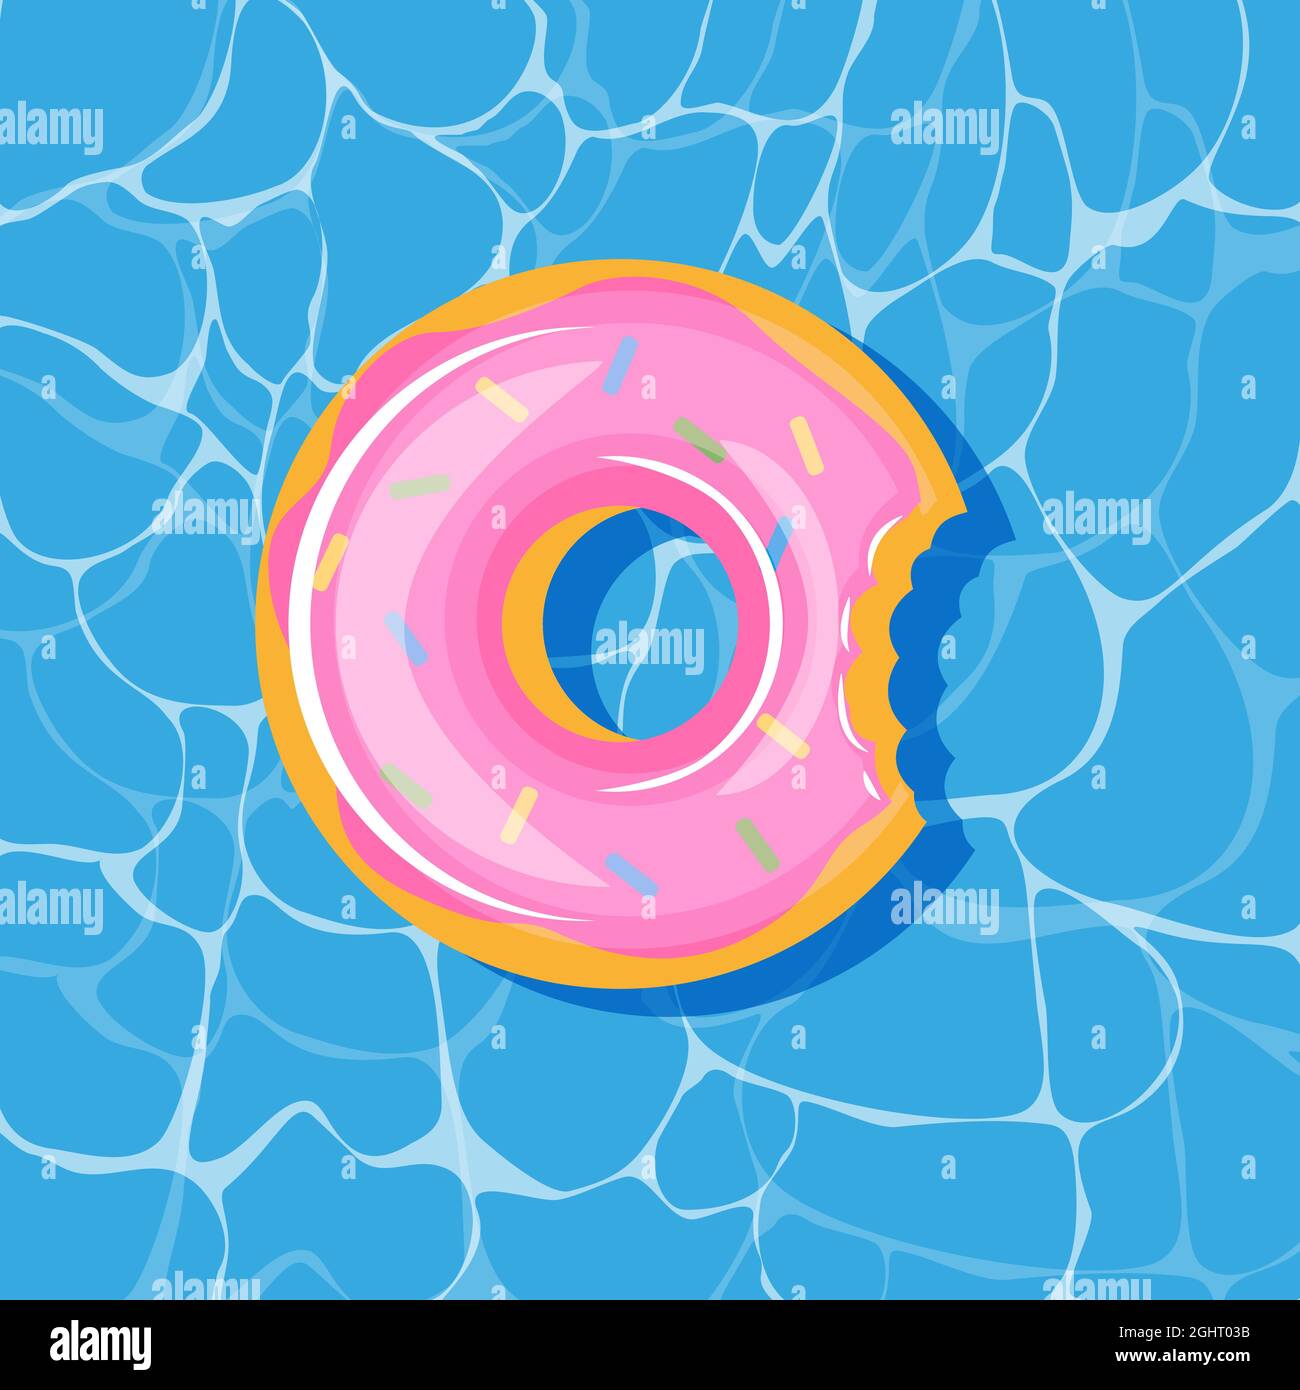 Pool infantable pink donut mattress place on water texture.  Stock Vector